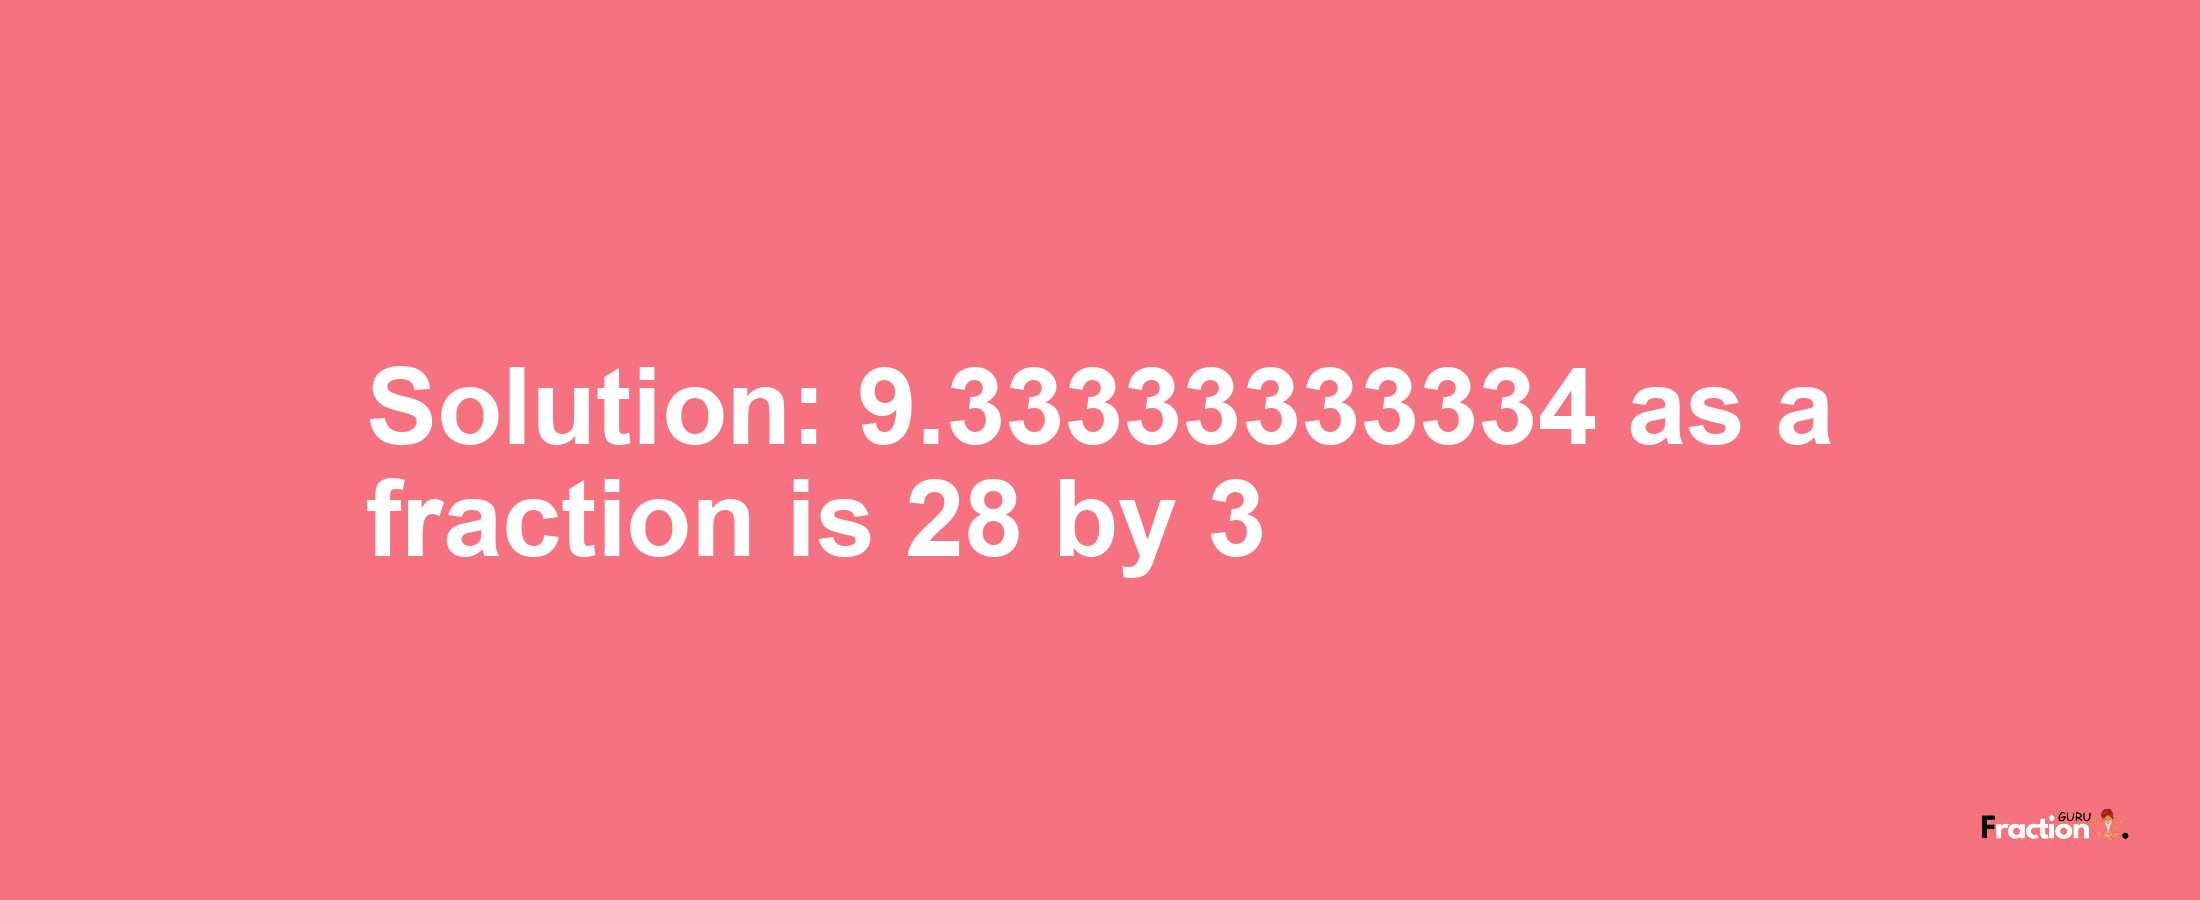 Solution:9.33333333334 as a fraction is 28/3